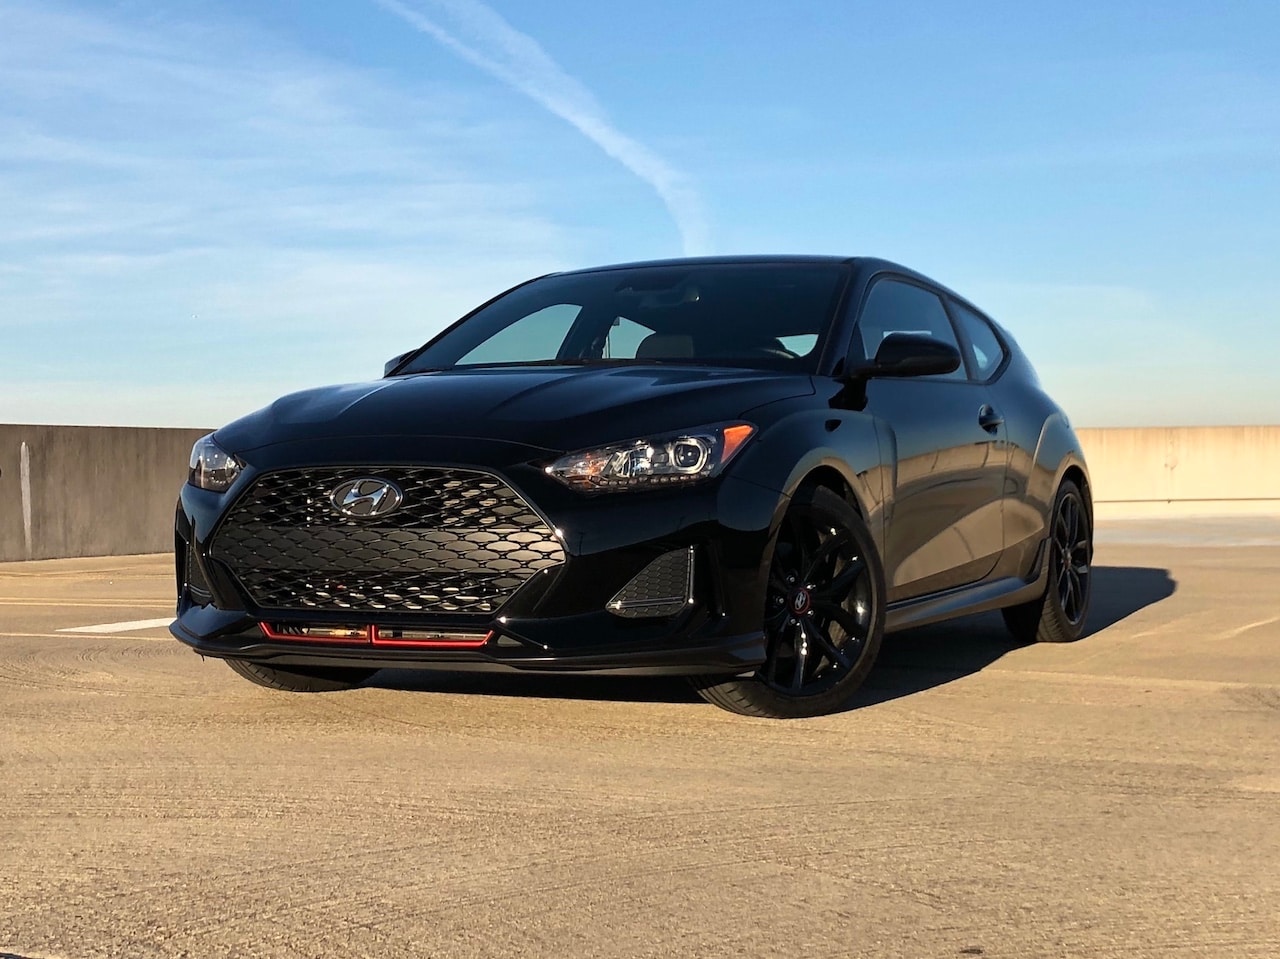 Exterior view of the 2019 Hyundai Veloster Turbo R Spec